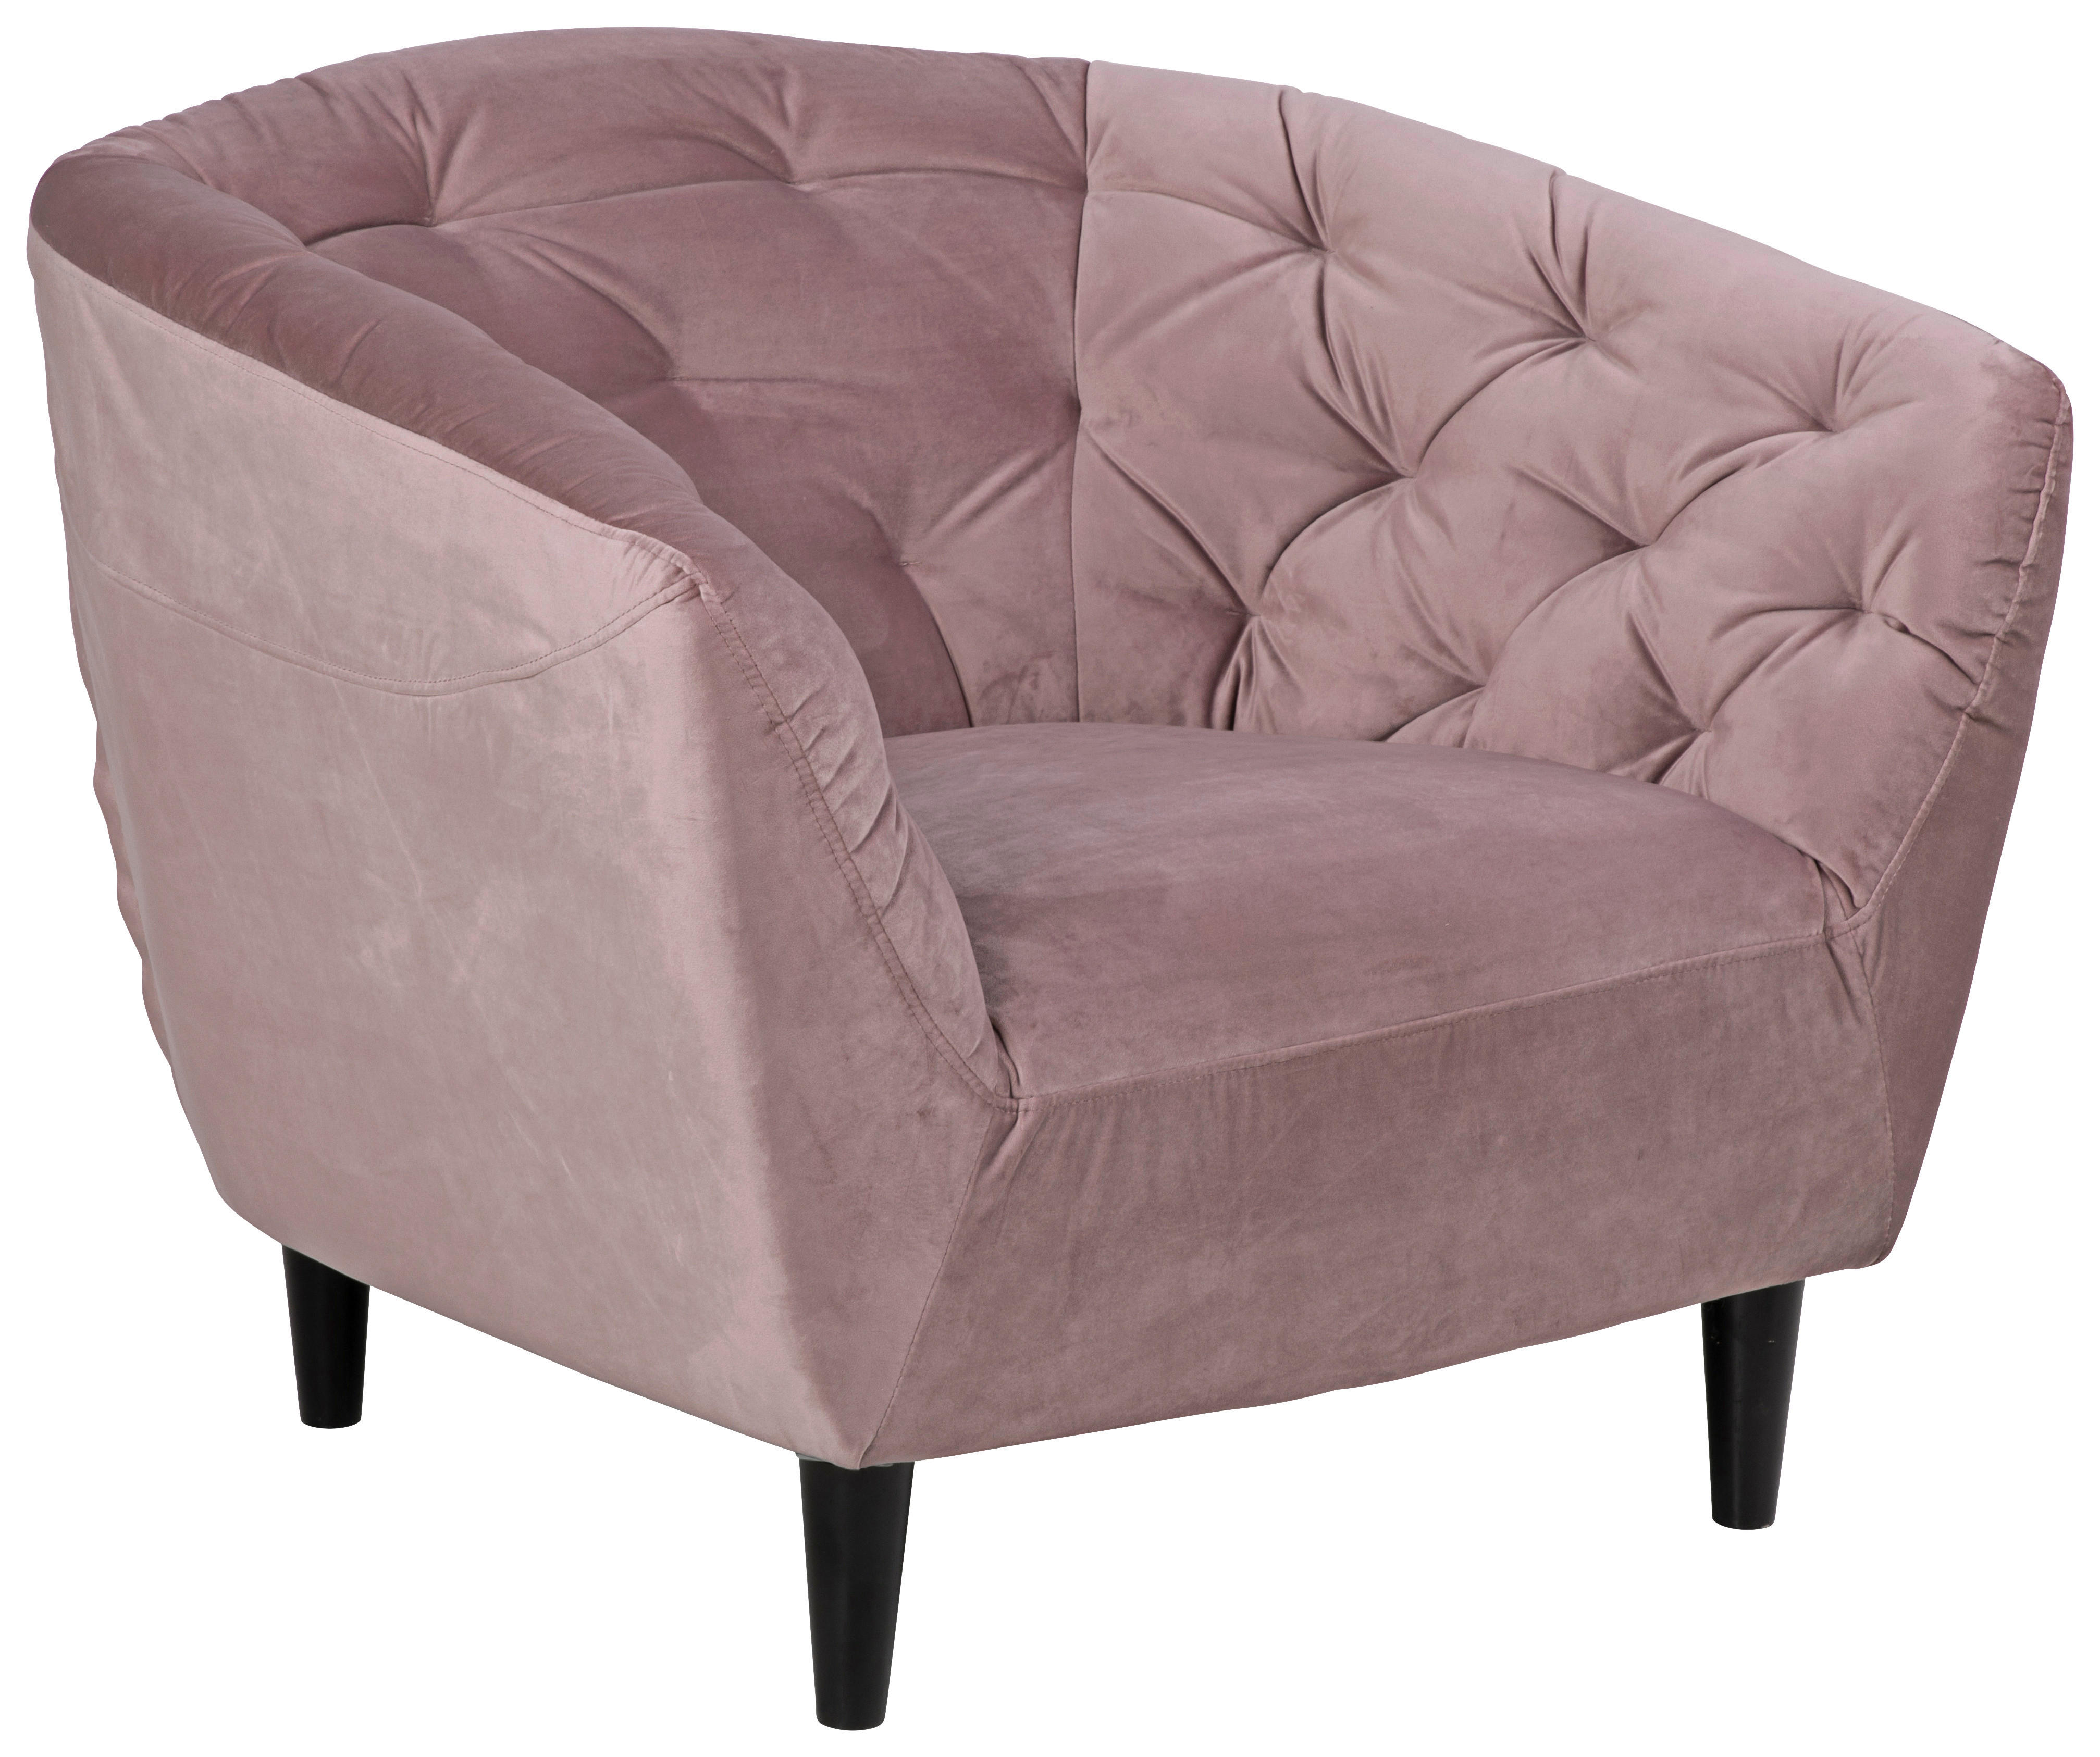 CHESTERFIELD-SESSEL Samt Rosa    - Schwarz/Rosa, Trend, Holz/Textil (97/79/83cm) - Ambia Home